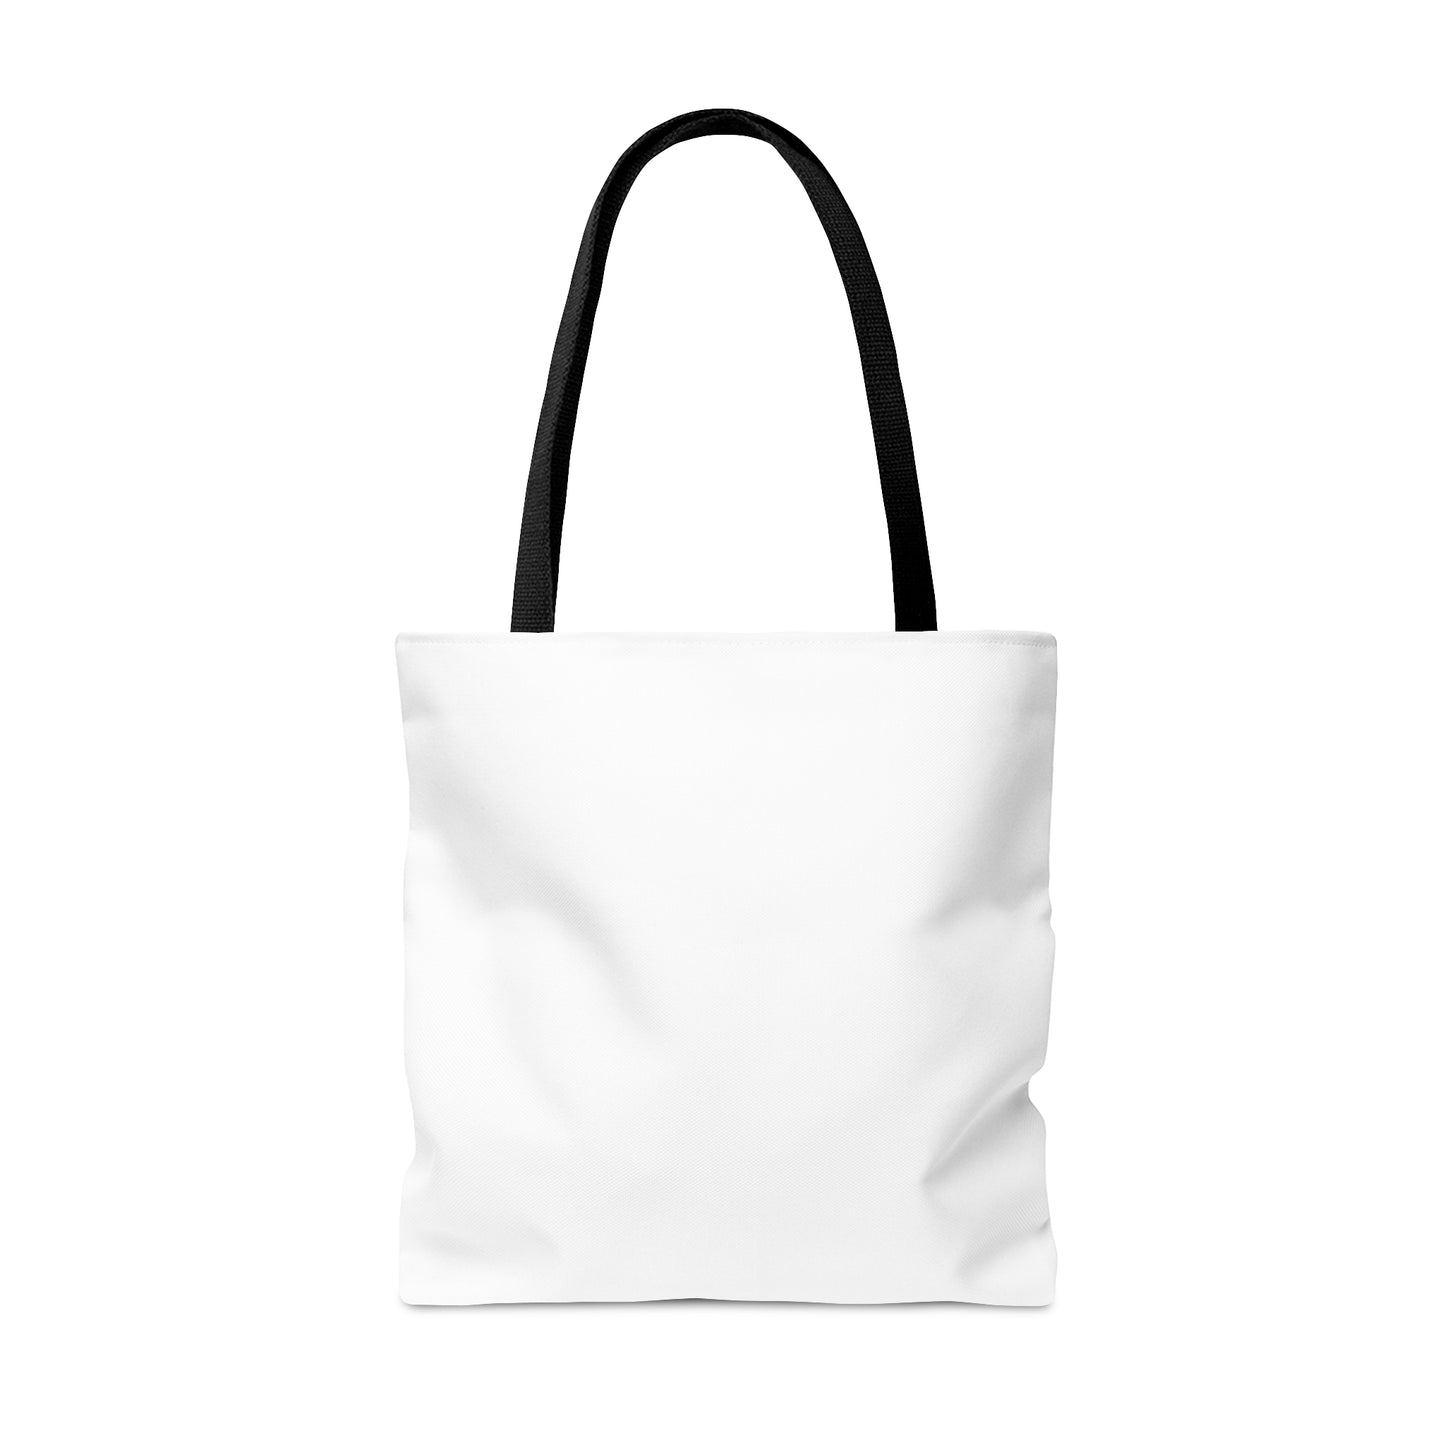 Cupcake Guardian Tote: Defending Sweetness with Style